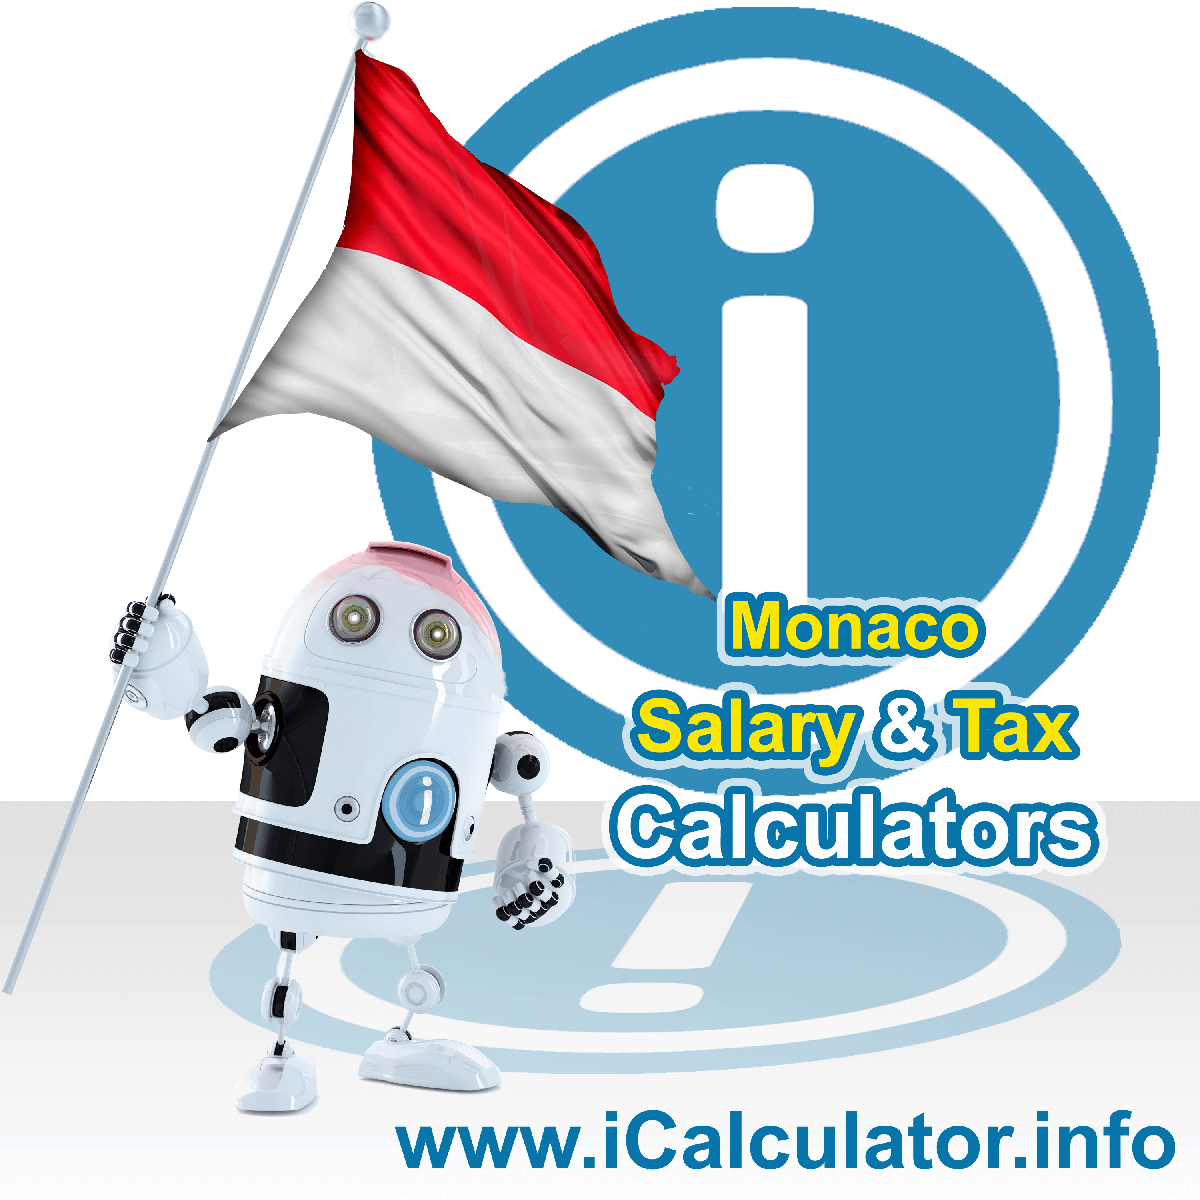 Monaco Salary Calculator. This image shows the Monacoese flag and information relating to the tax formula for the Monaco Tax Calculator